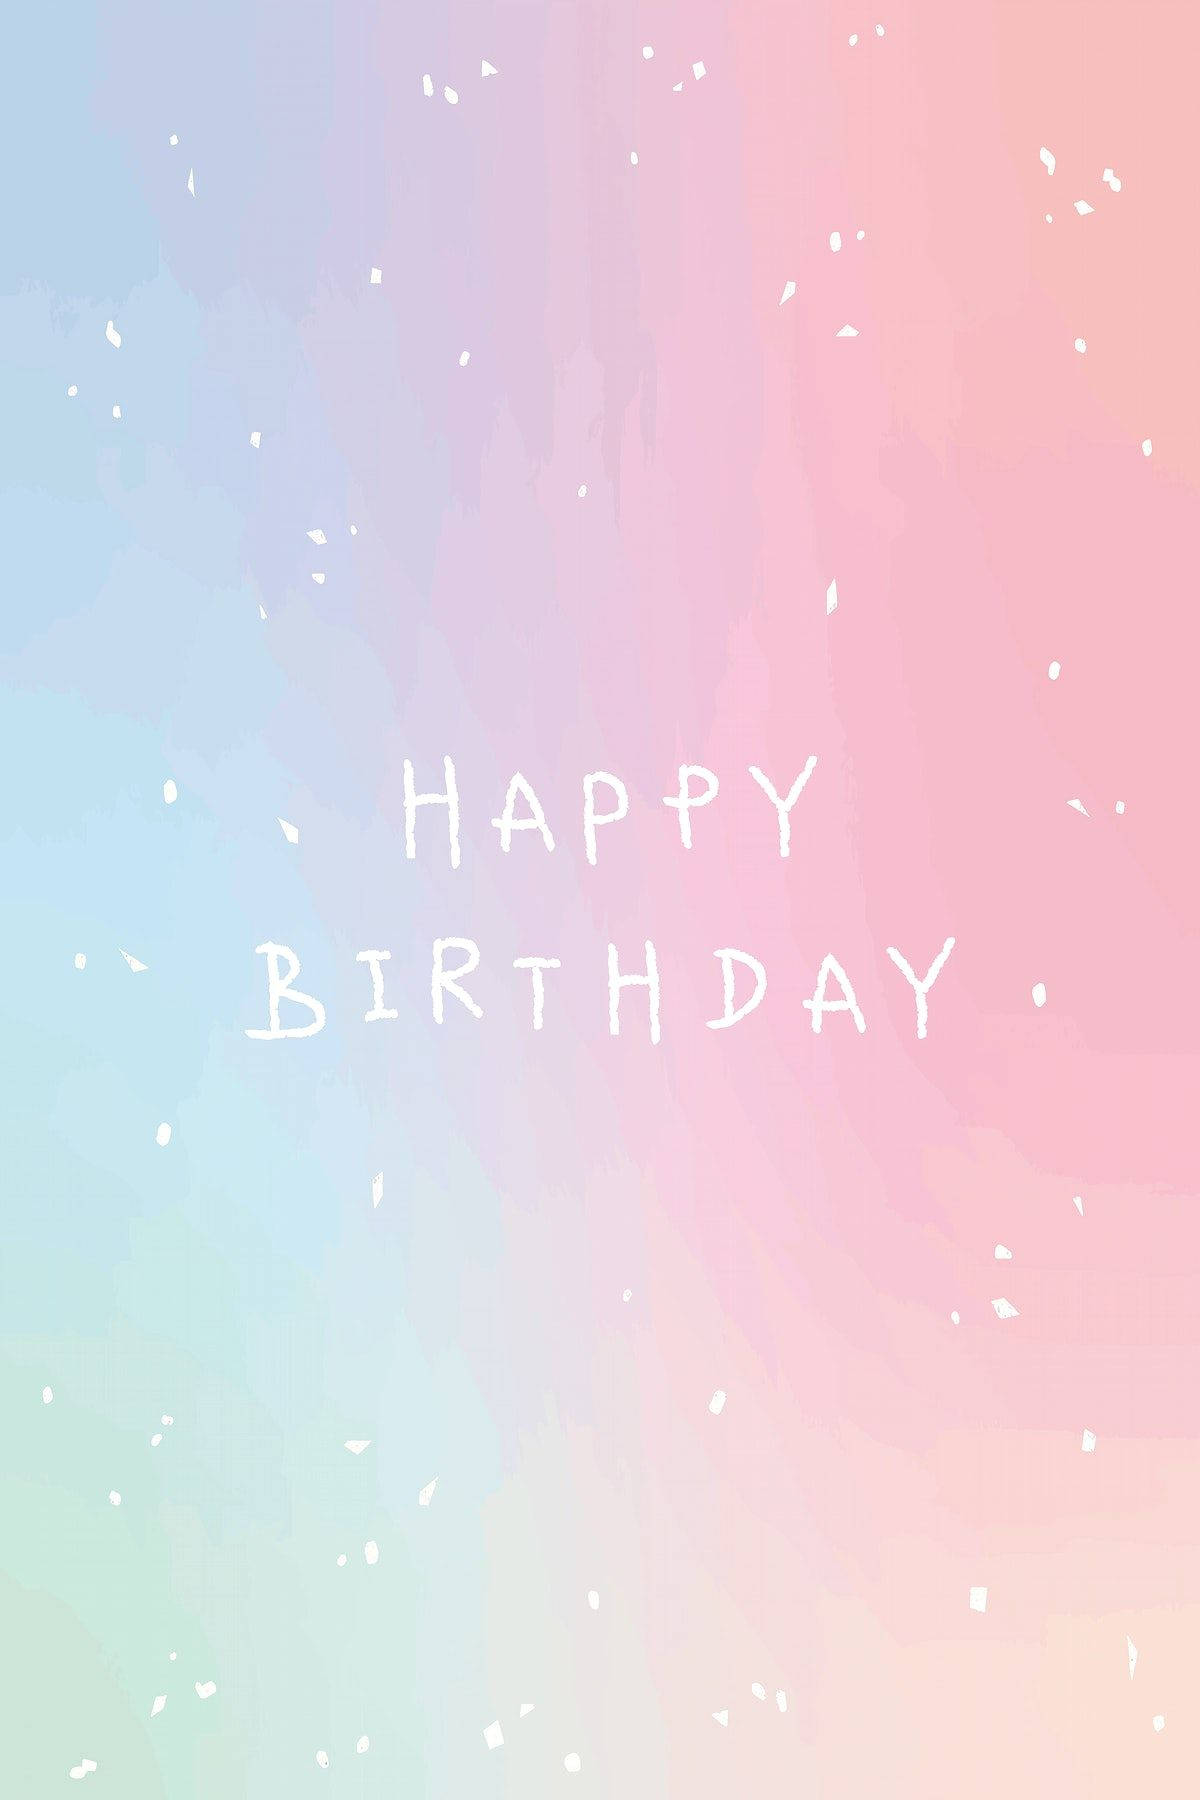 Birthday Background Images, HD Pictures and Wallpaper For Free Download |  Pngtree